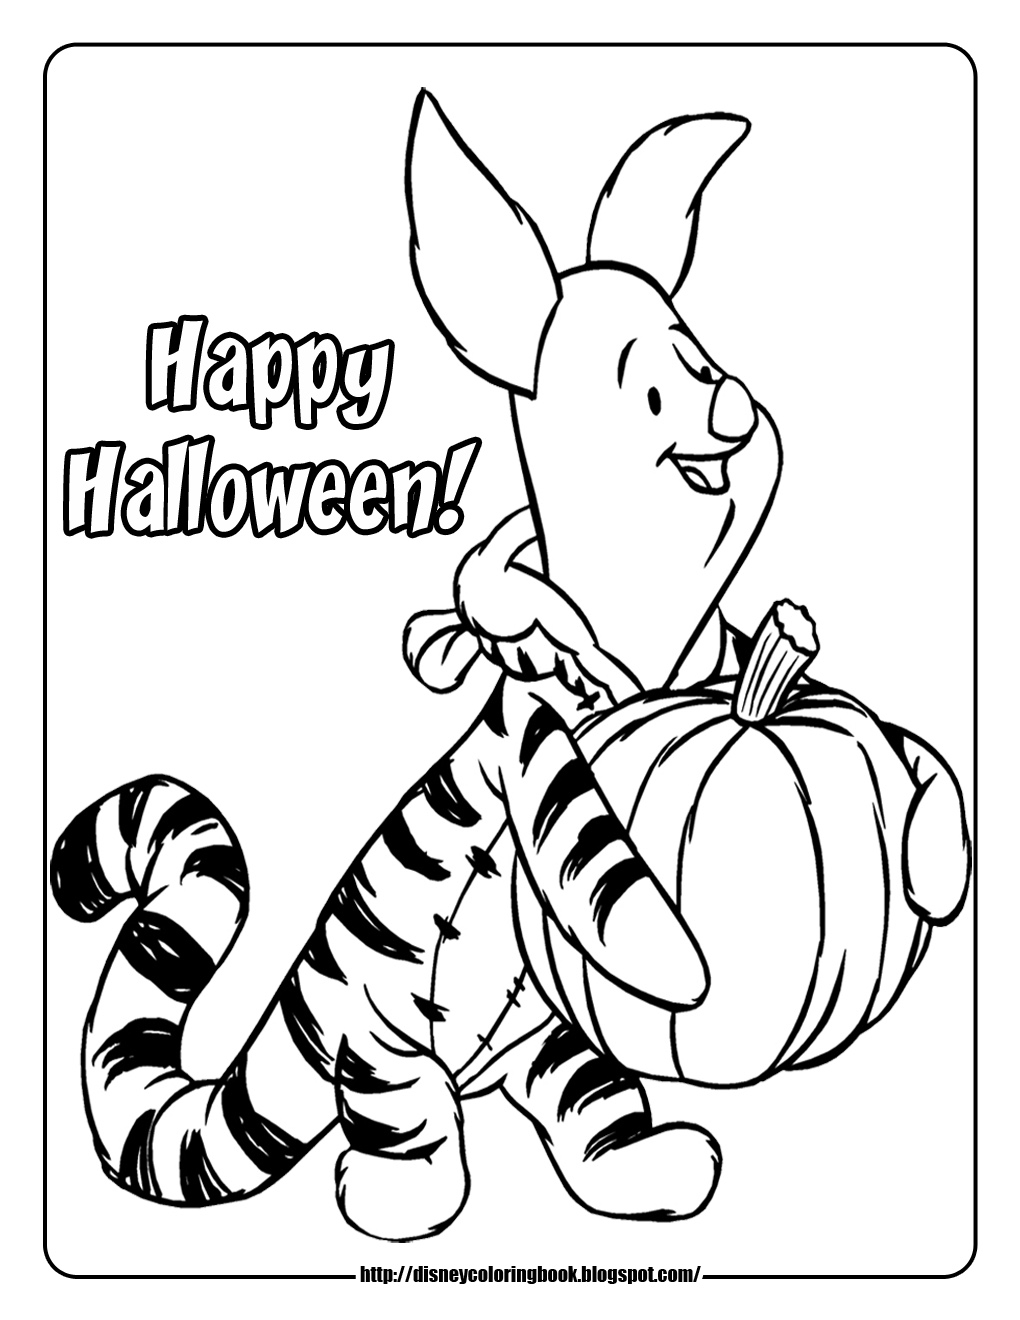 Disney Coloring Pages and Sheets for Kids: Pooh and Friends Halloween 2